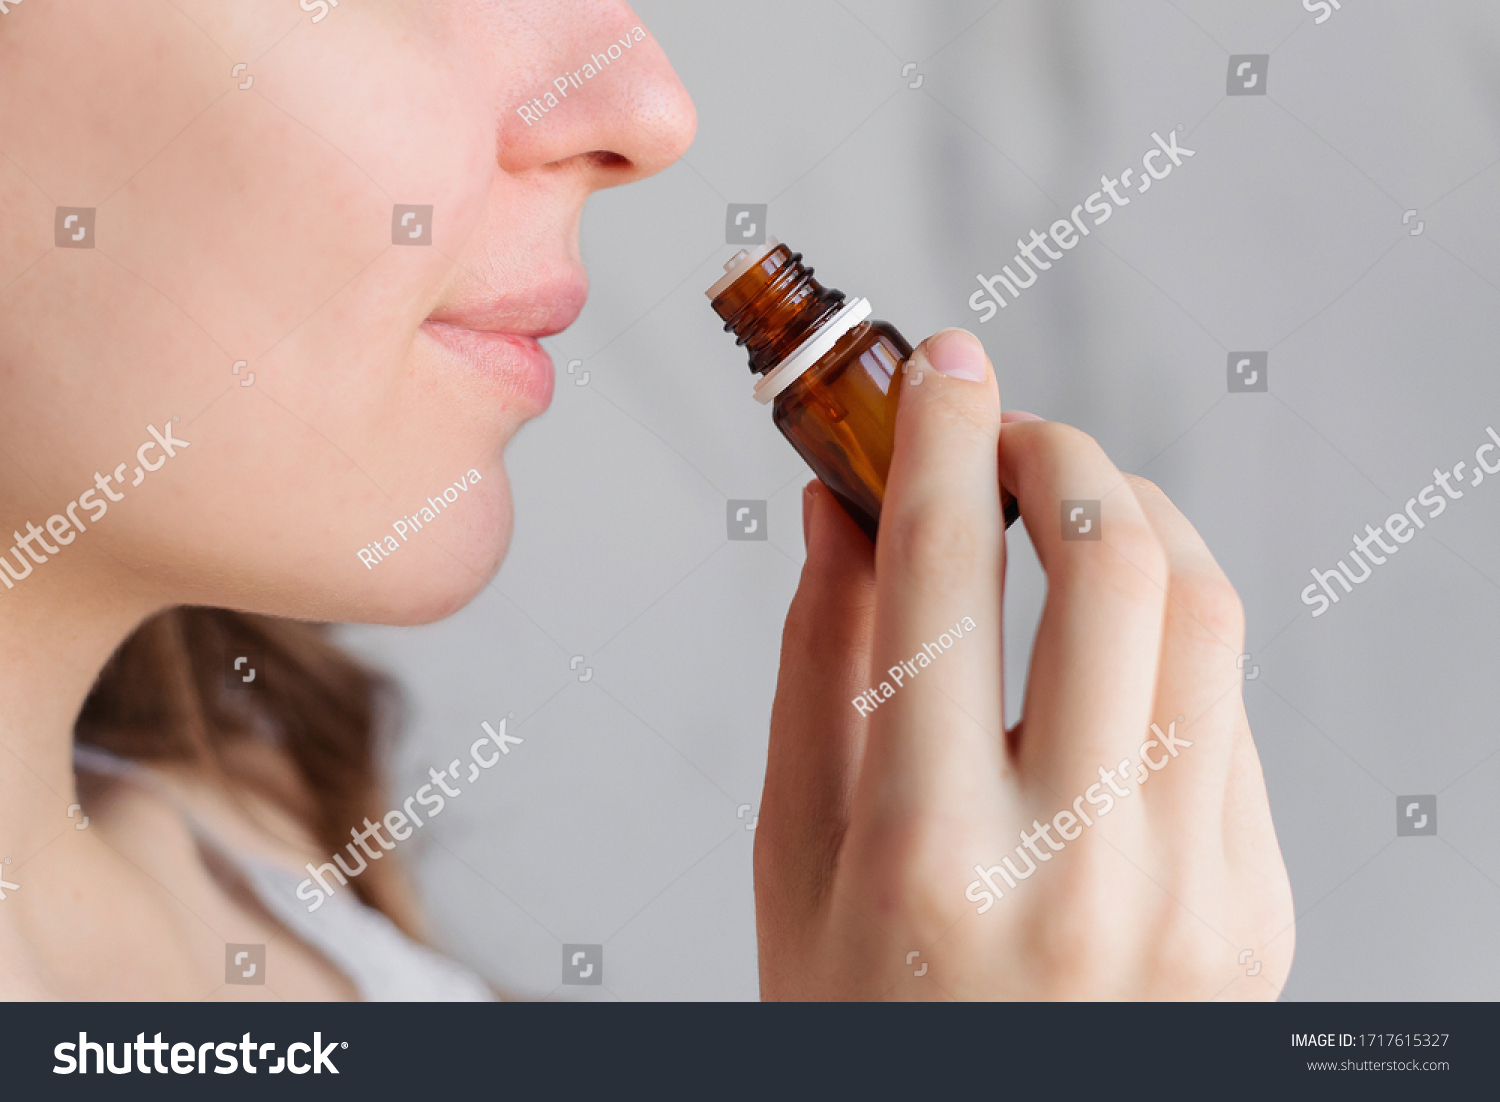 Aromatherapy: a girl with beautiful skin holds a bottle of essential oil near her nose and inhales. Close up, bright marble background. #1717615327